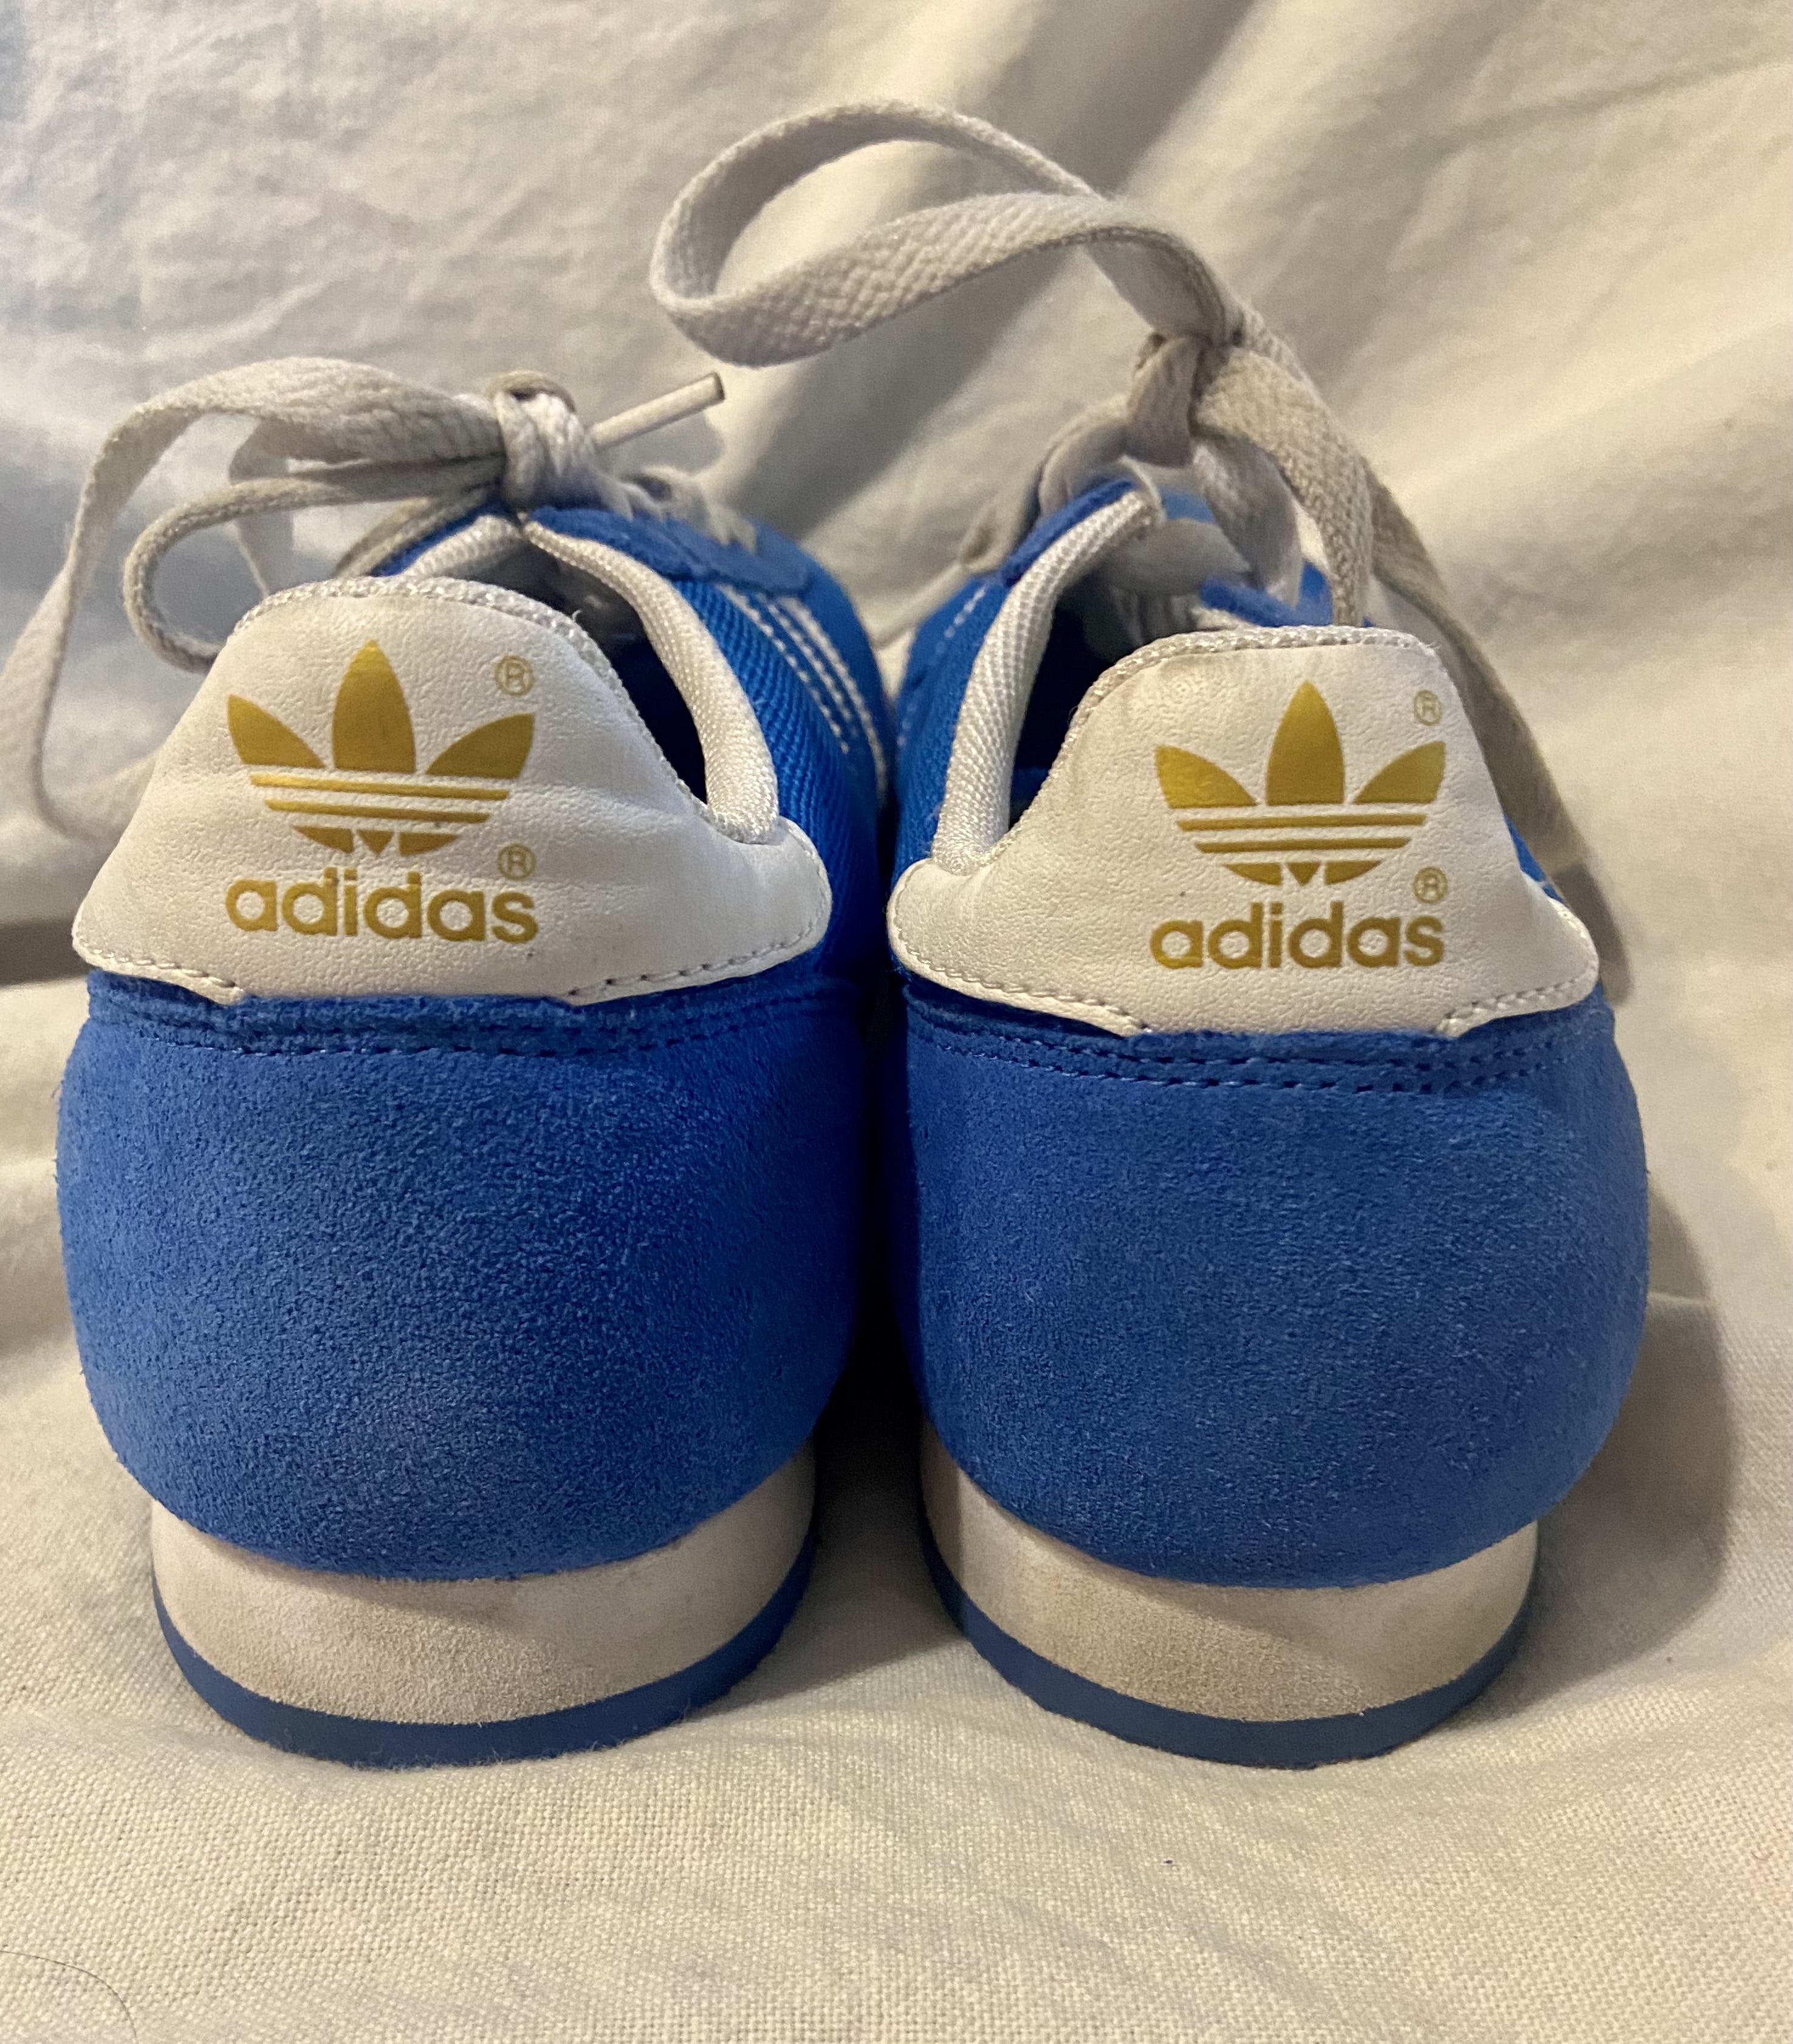 Pump hjul vitalitet Vintage 70's Blue Suede "Dragon" Sneakers by Adidas | Shop THRILLING